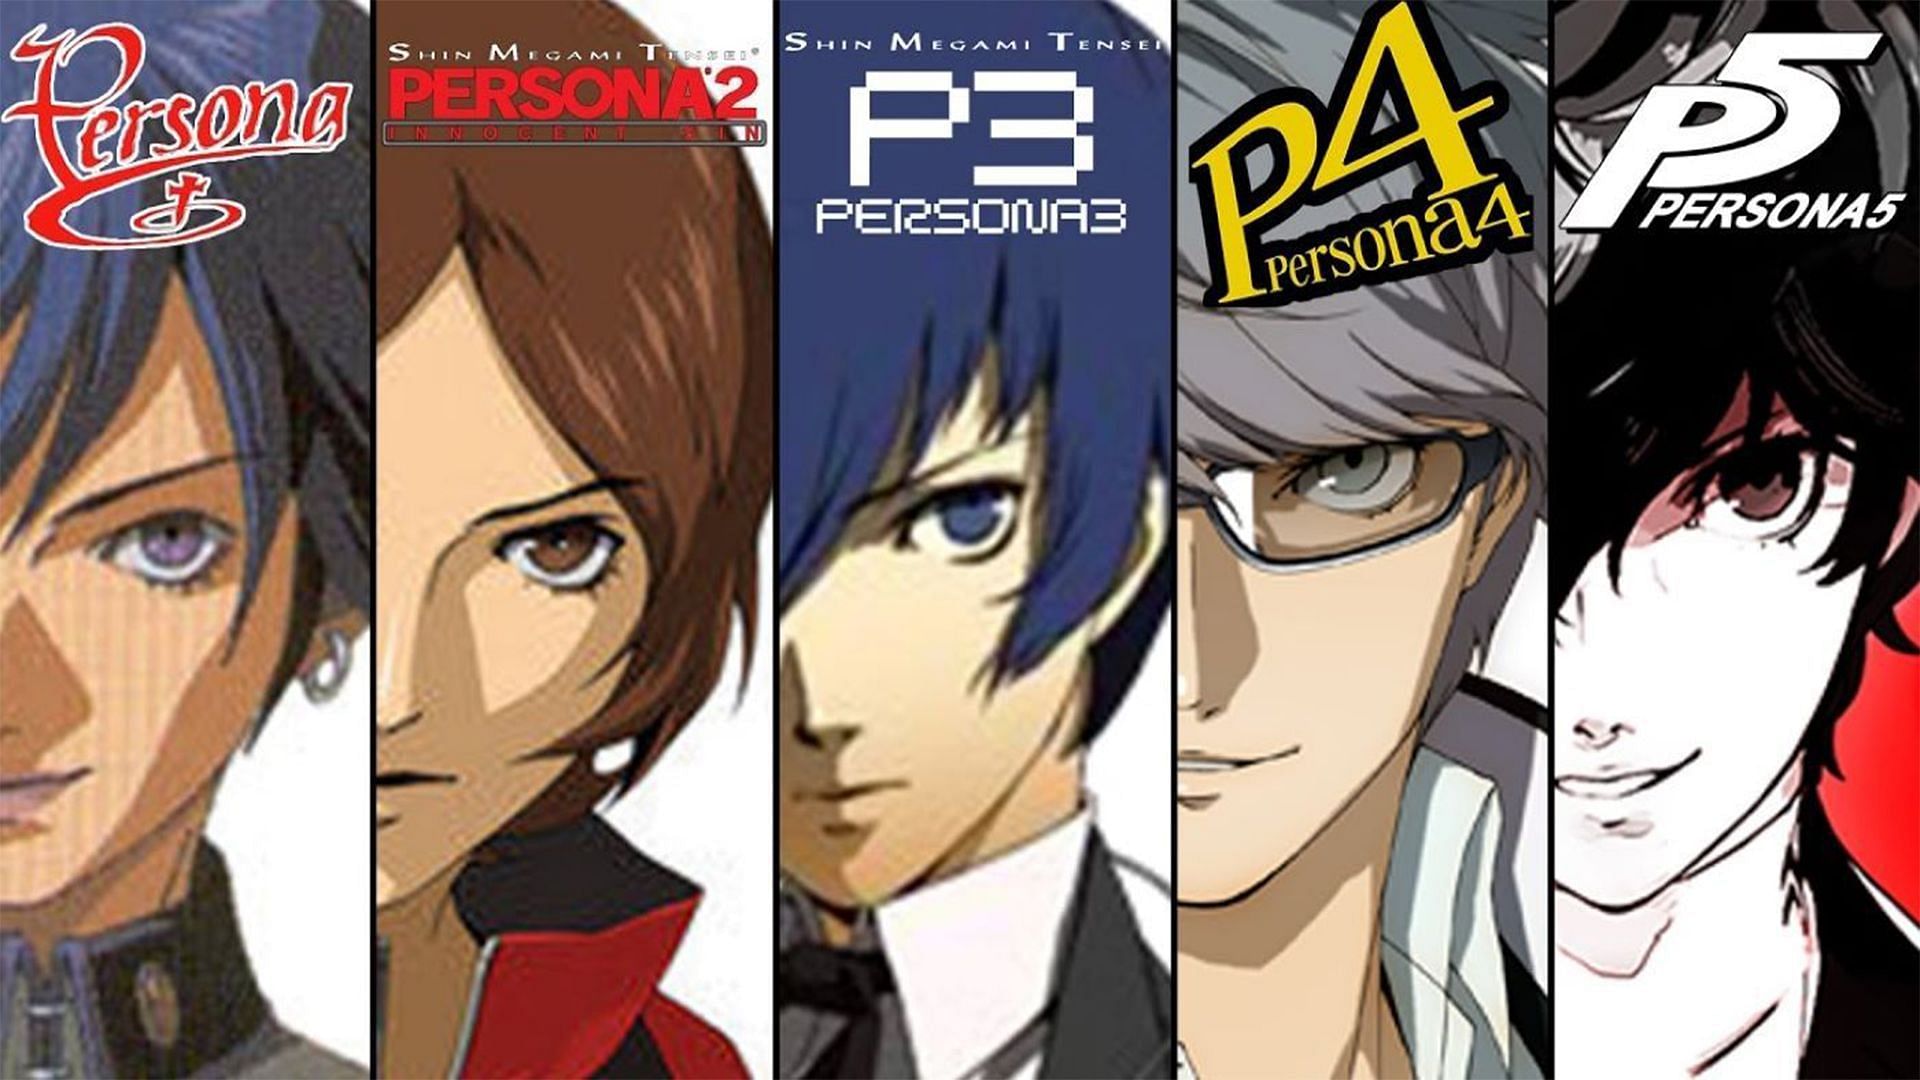 When will gamers on PC finally be able to get their hands on the full Persona series? (image via Sega/Atlus)